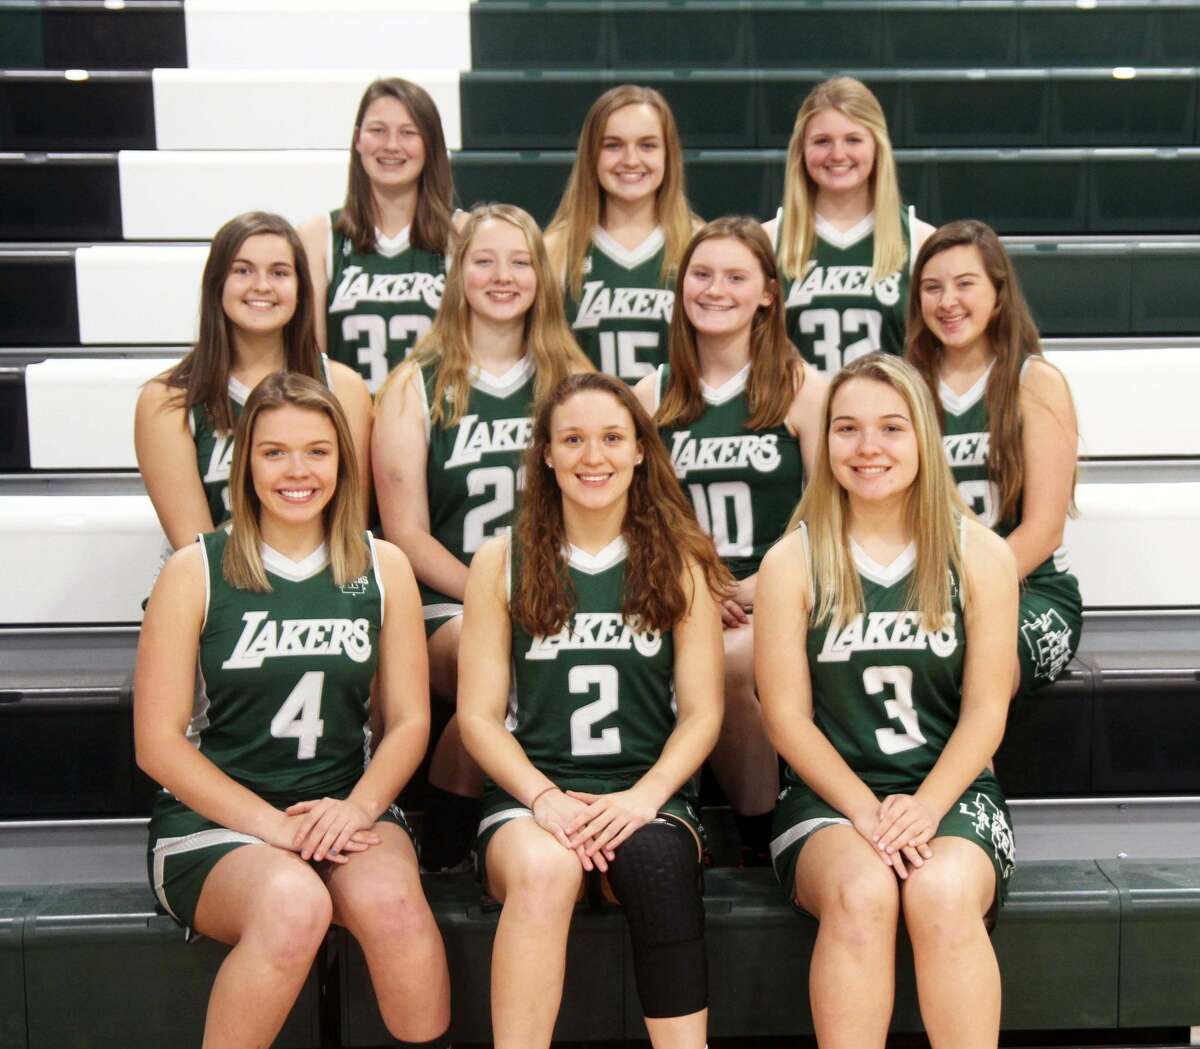 The 2019-2020 Laker girls basketball team is, front row, Lanea Rosa, Kyle Bowles and Lauren Henry; middle row, Leah Irion, Madison Helmuth, Savannah Schulz and Hannah Helmuth; and back row, Alexandria Scuddan, Emma Lee Irion and Hannah Penfold.